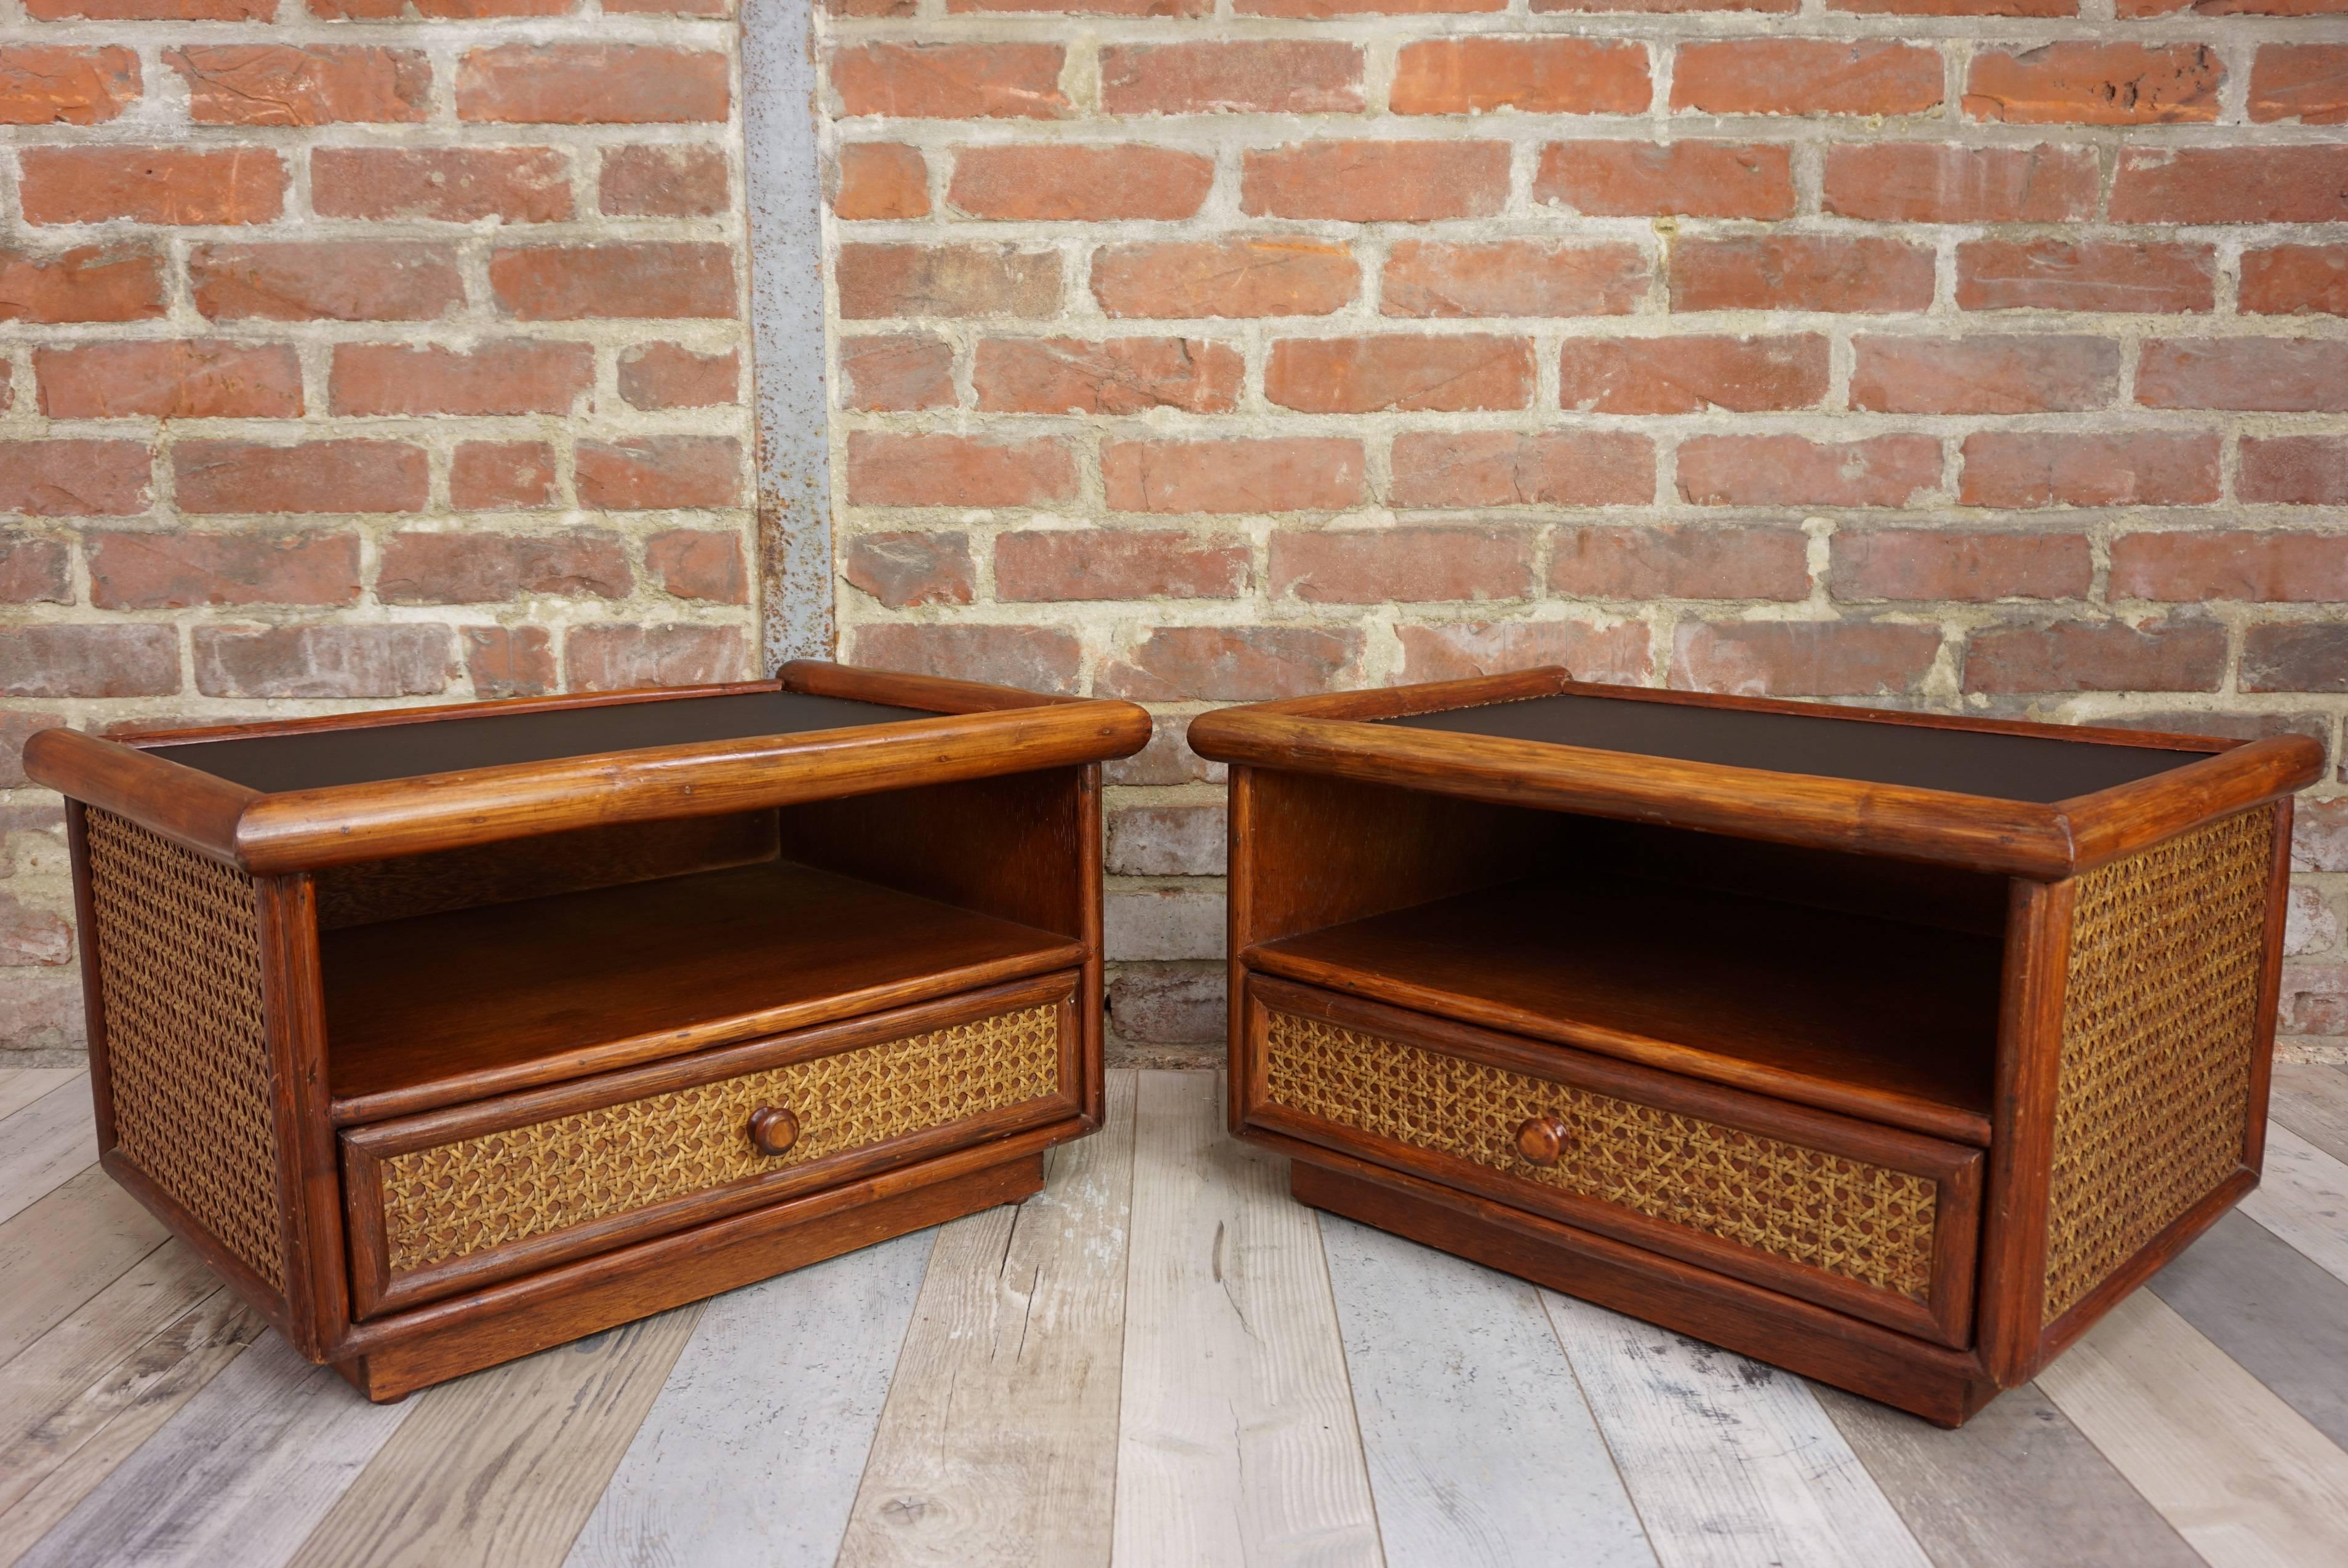 Pair of bedside tables from the 1960s-1970s composed of a wooden and rattan structure, dressed with cane black faux - leather for the tray. All in beautiful state of conservation!